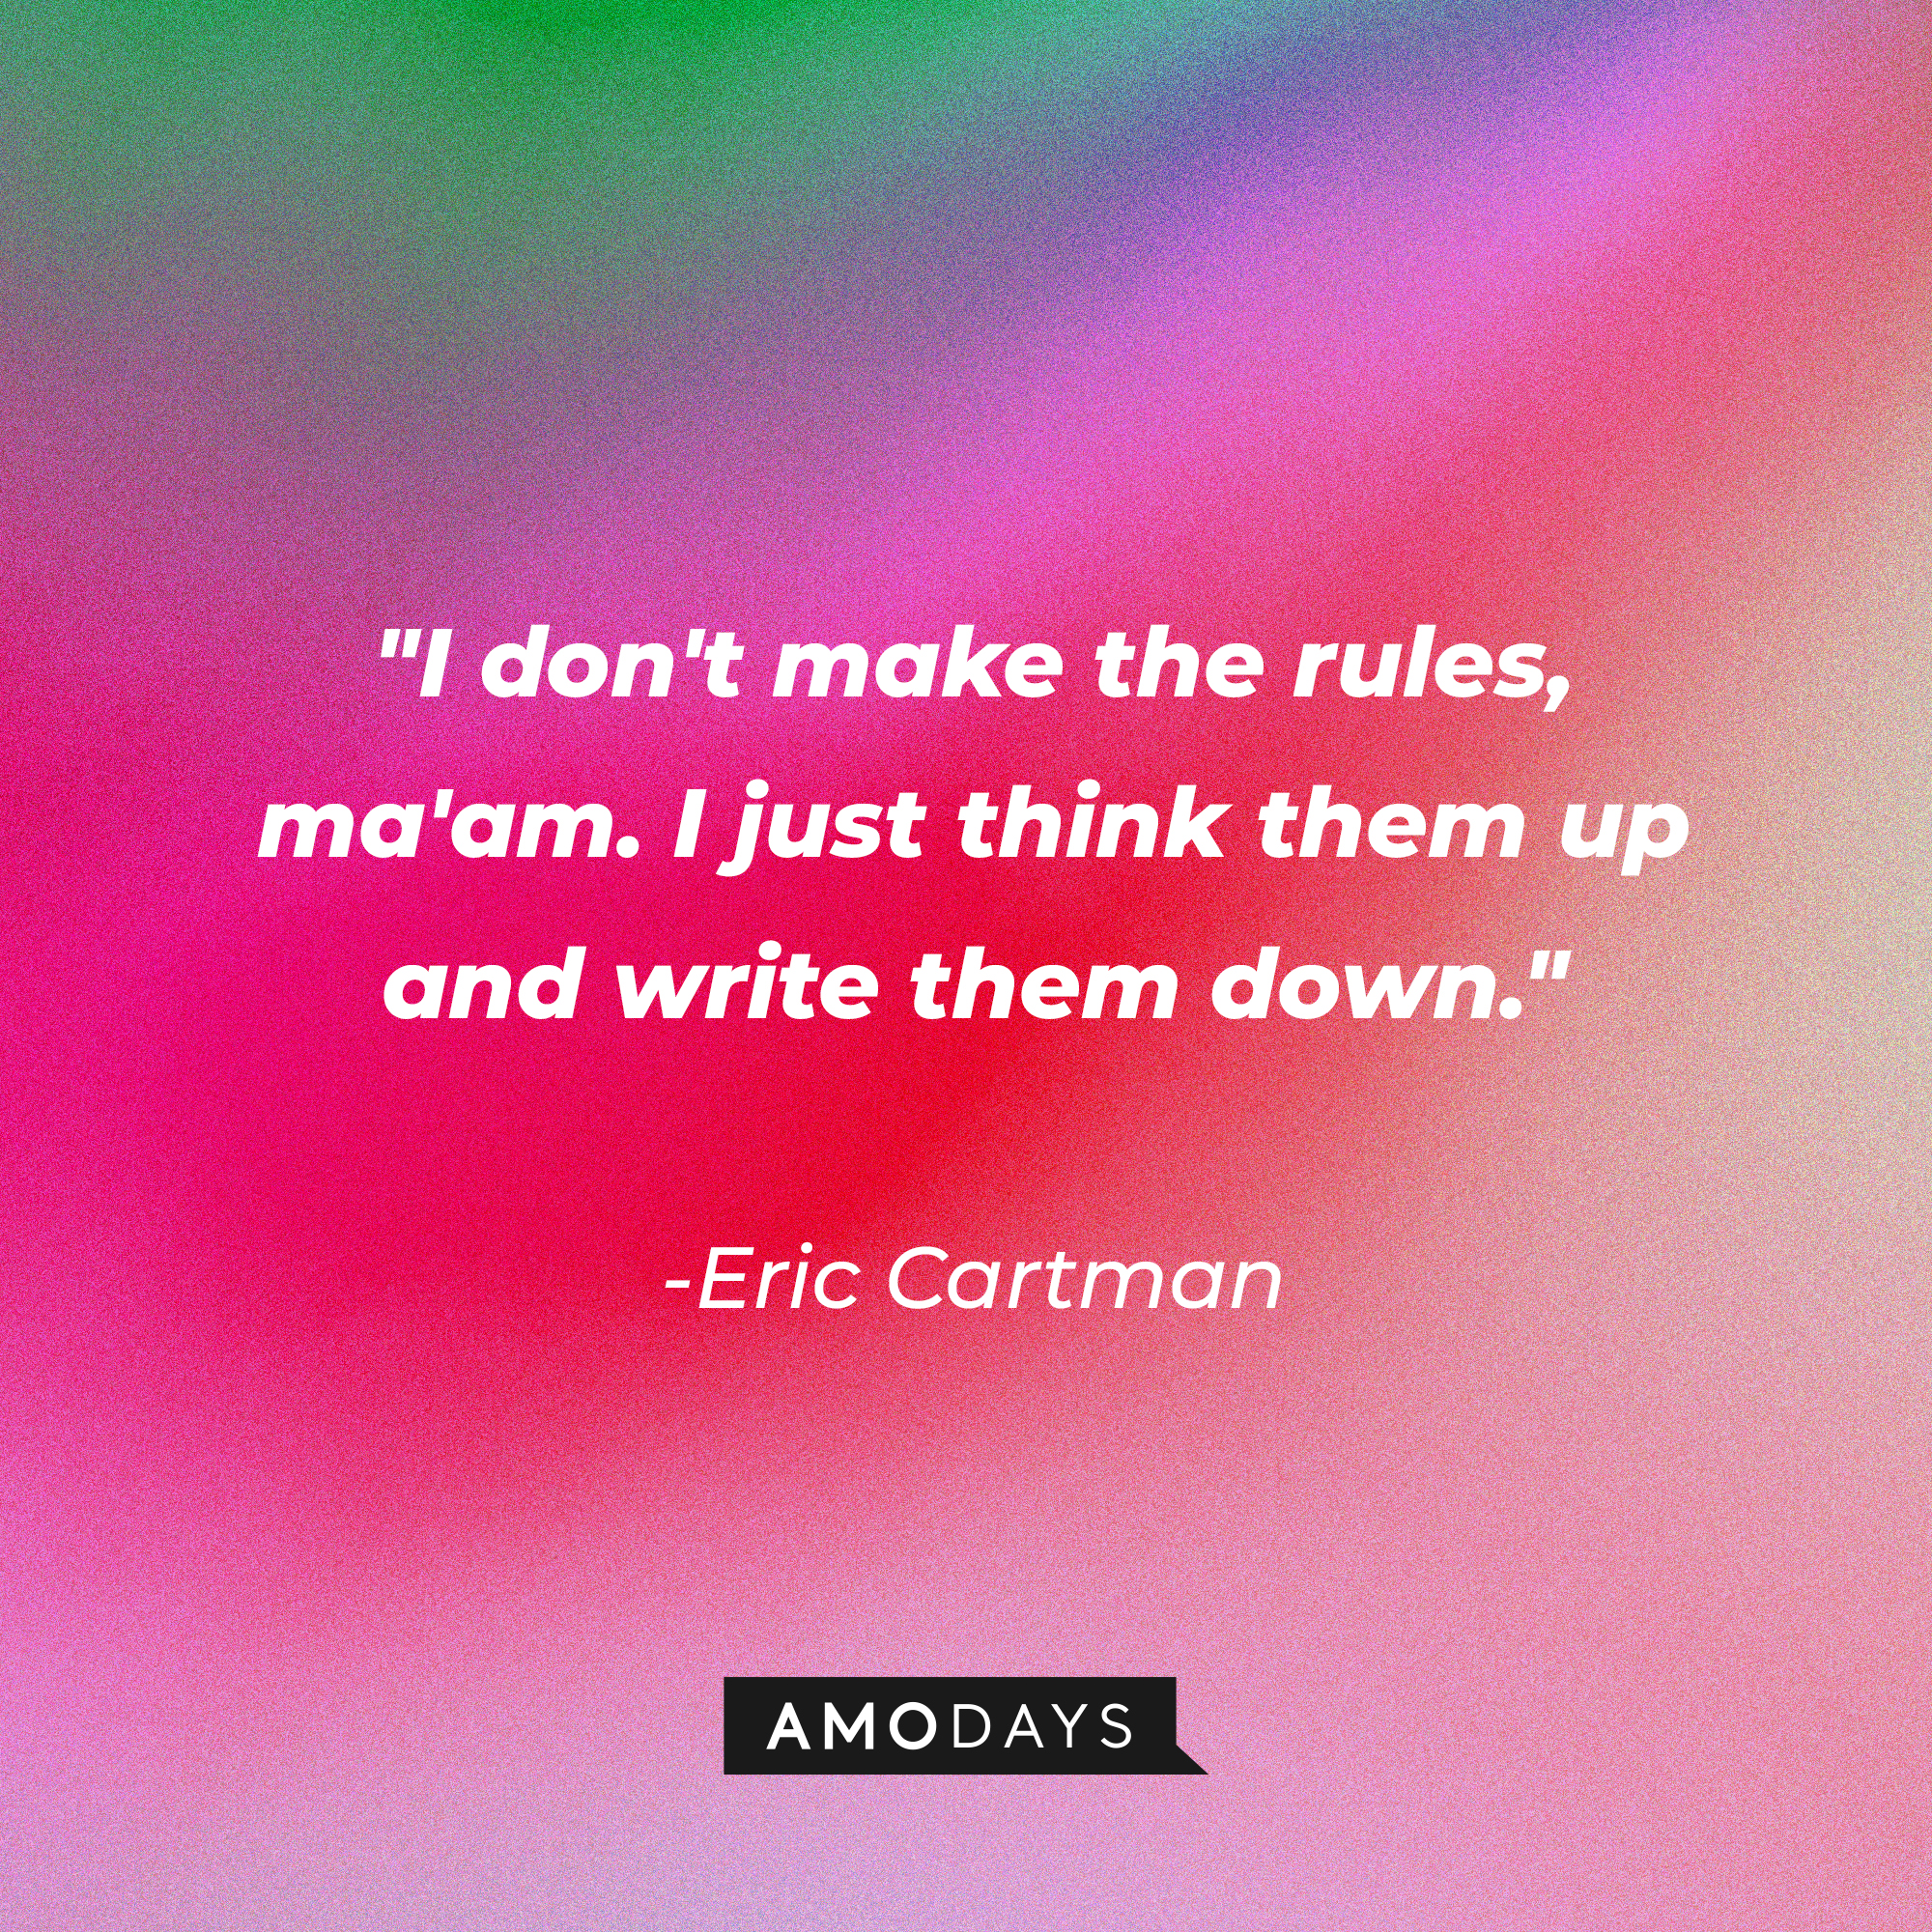 Eric Cartman's quote: "I don't make the rules, ma'am. I just think them up and write them down." | Source: AmoDays